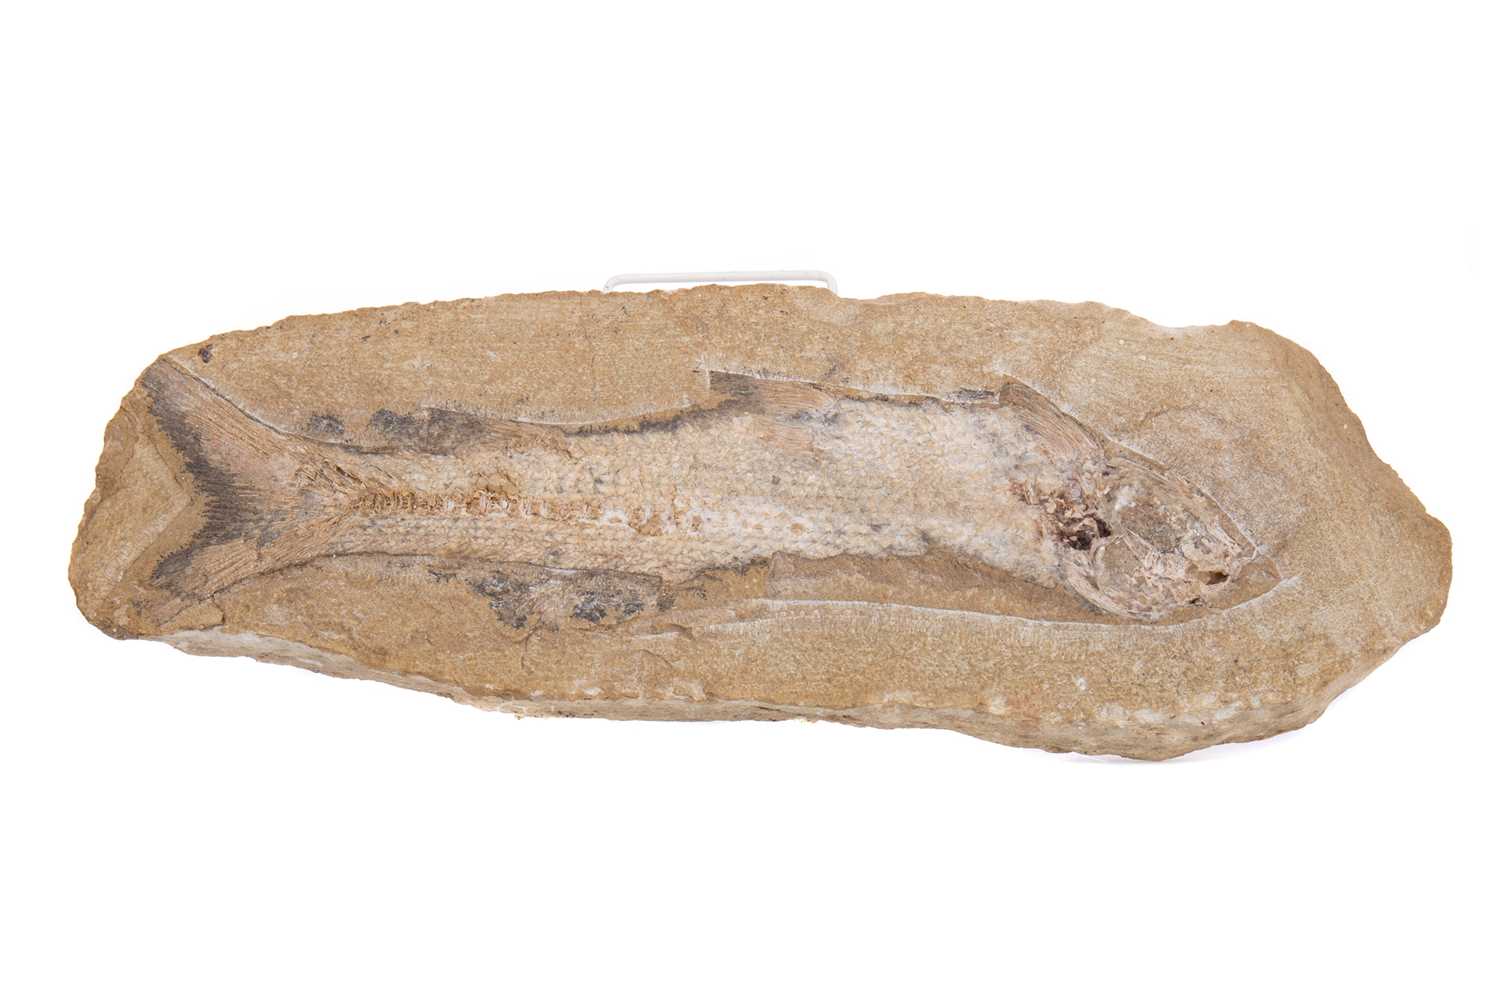 Lot 704 - A LARGE AND RARE SCOTTISH FISH FOSSIL